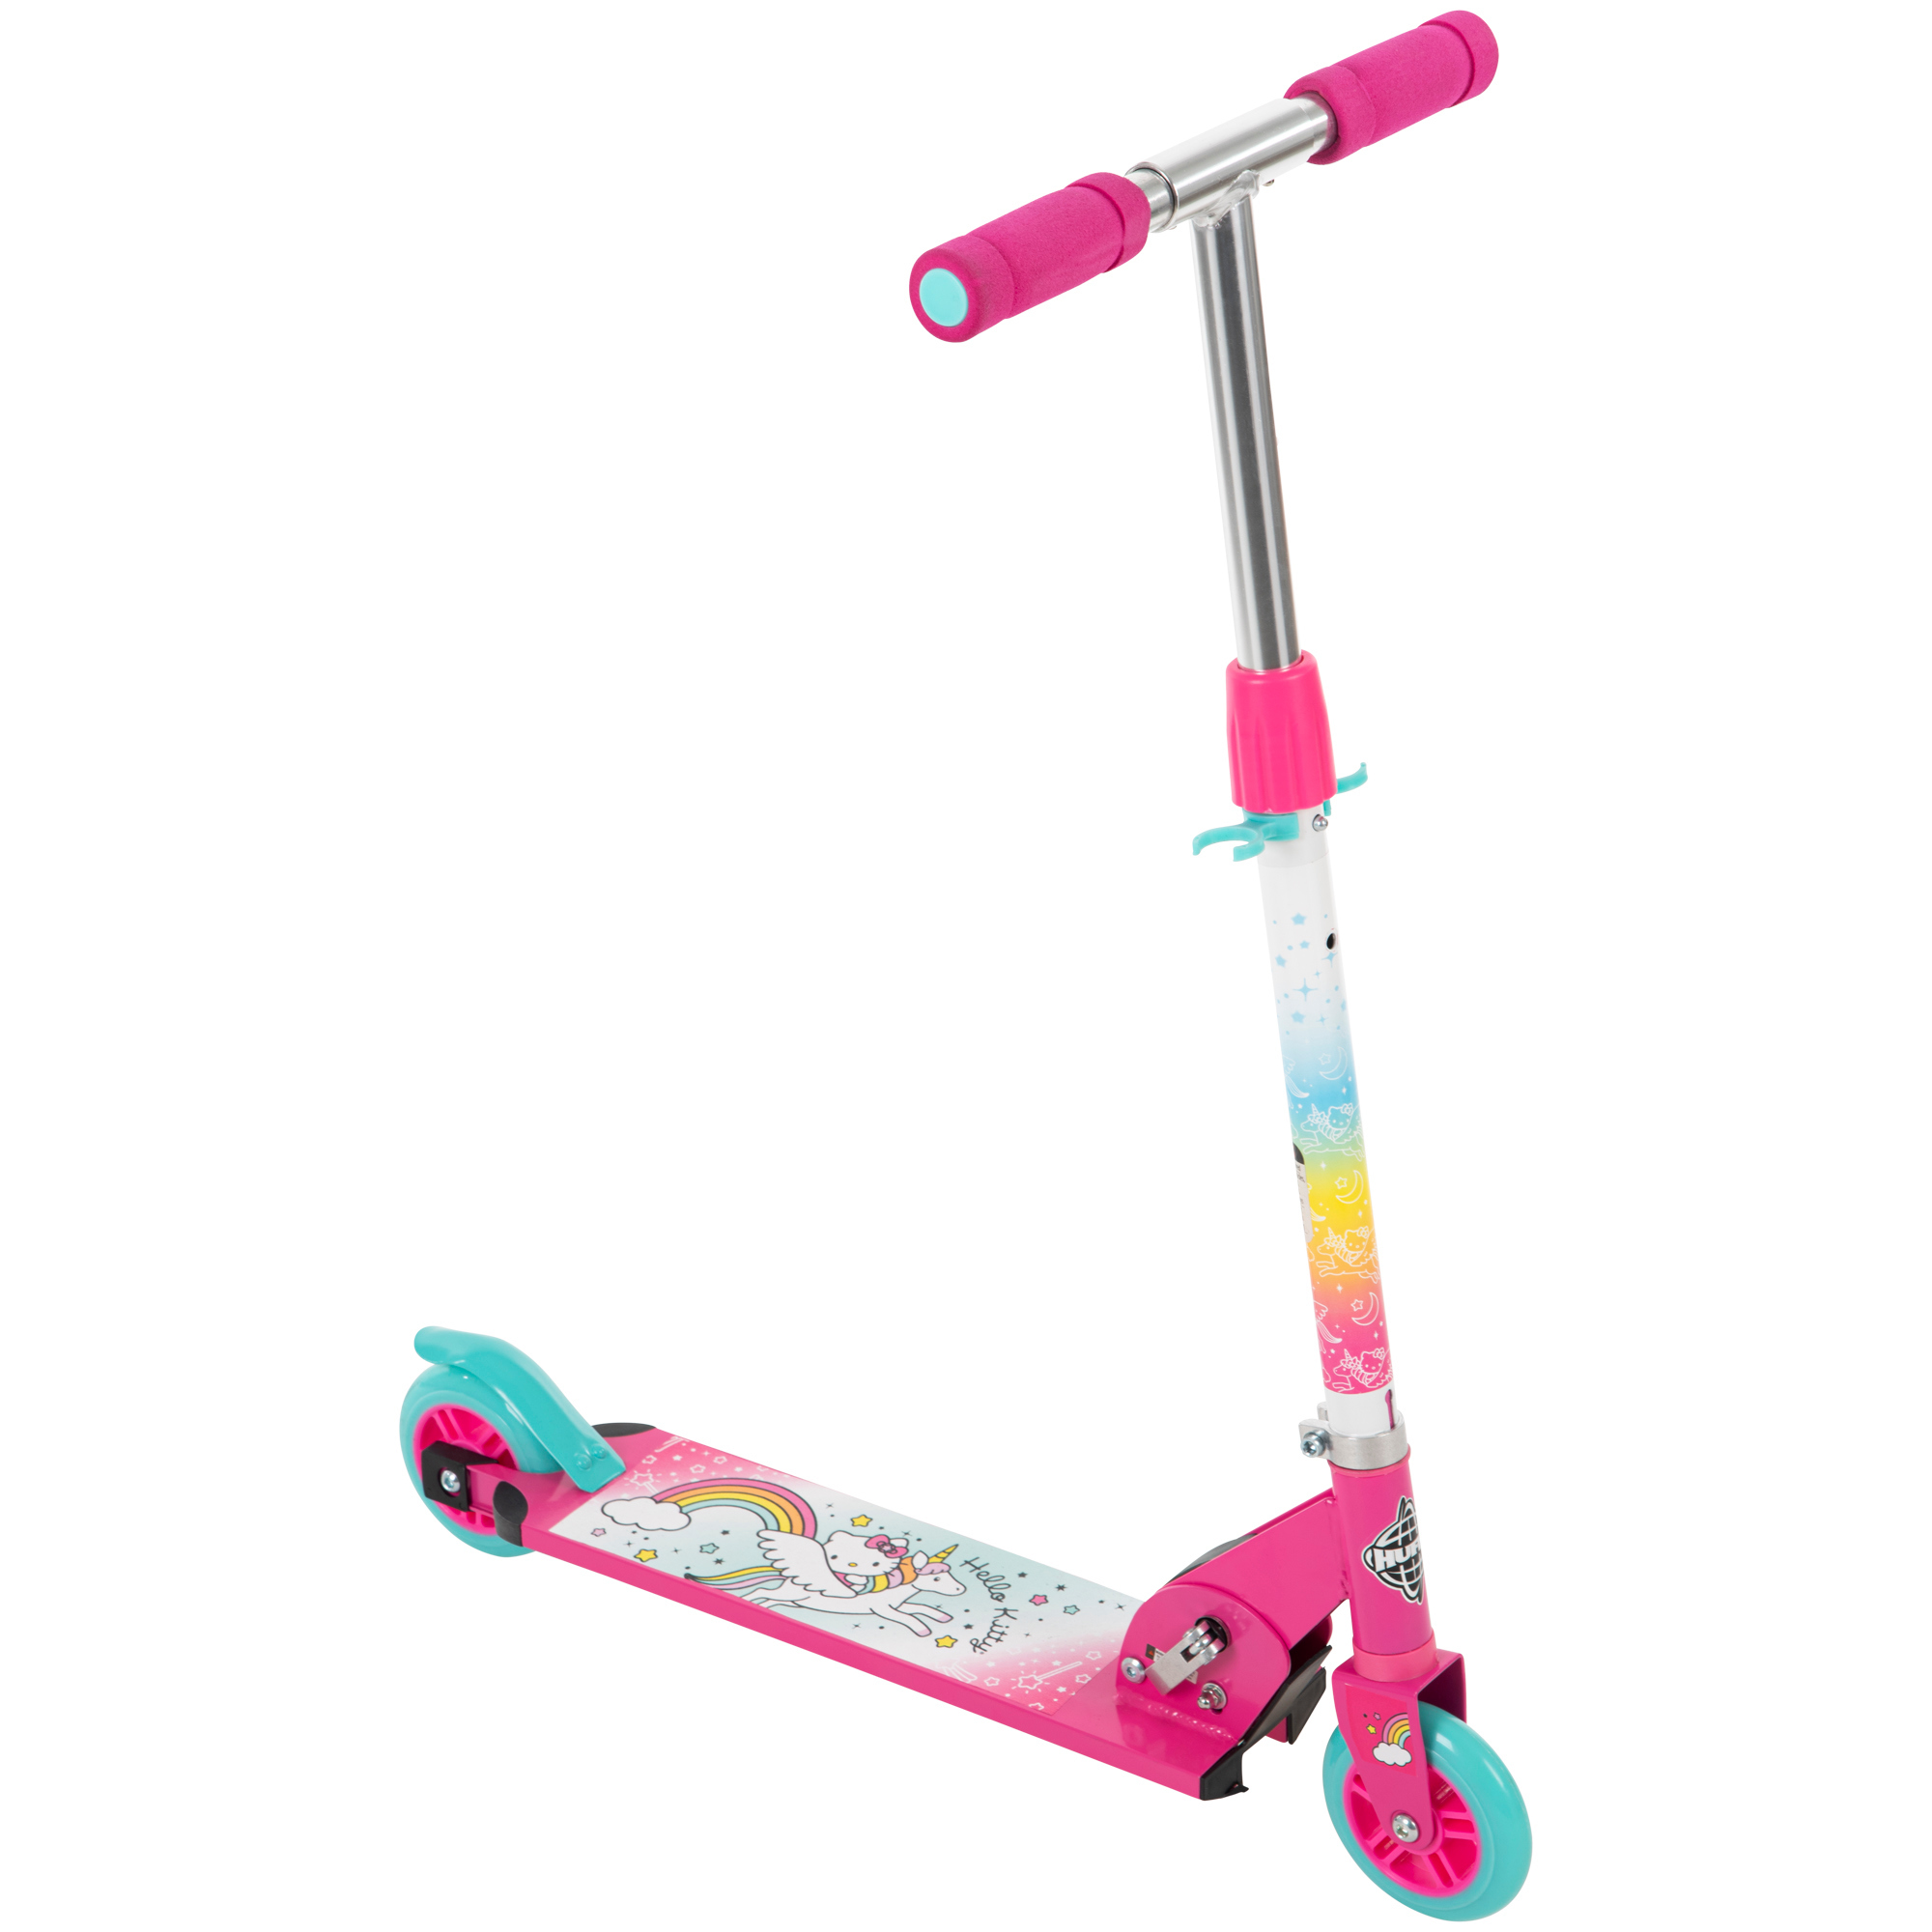 Hello Kitty Girls Inline Scooter, Pink, by Huffy - image 1 of 9